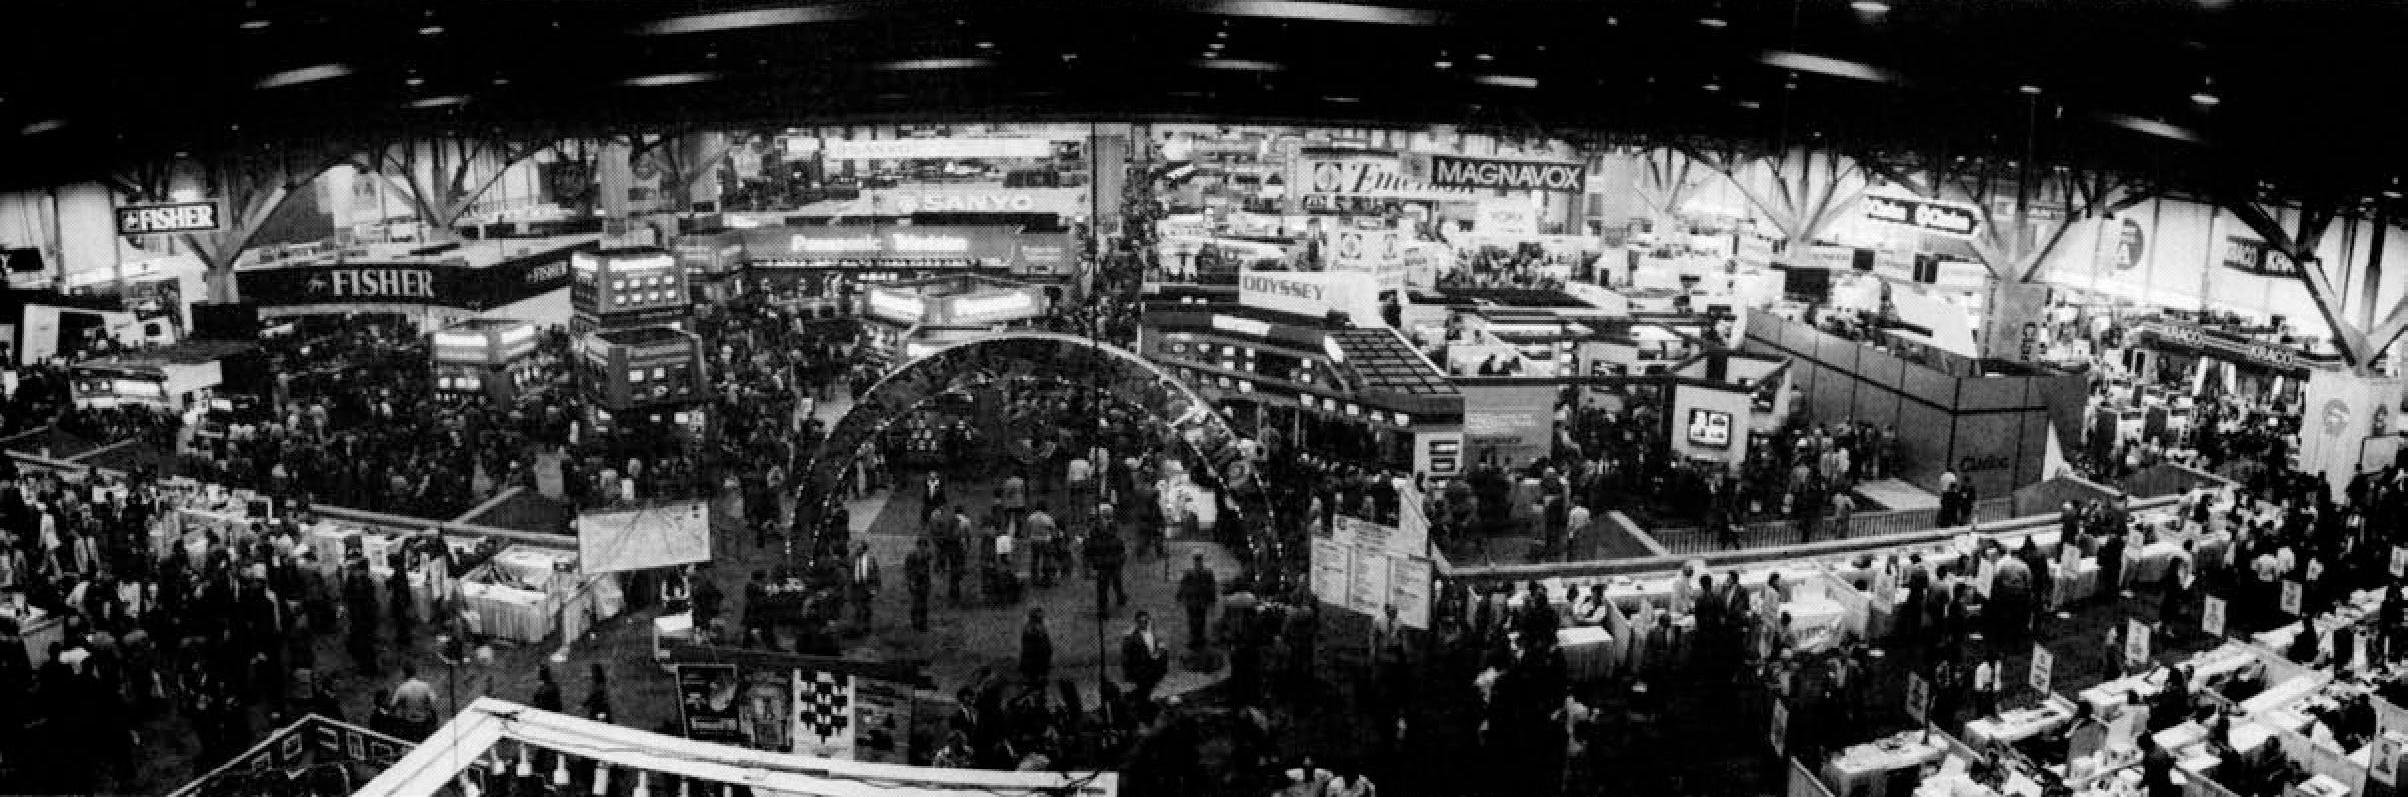 1983 expansive shot showing the large Winter Consumer Electronics Show and the emphasis on gaming.